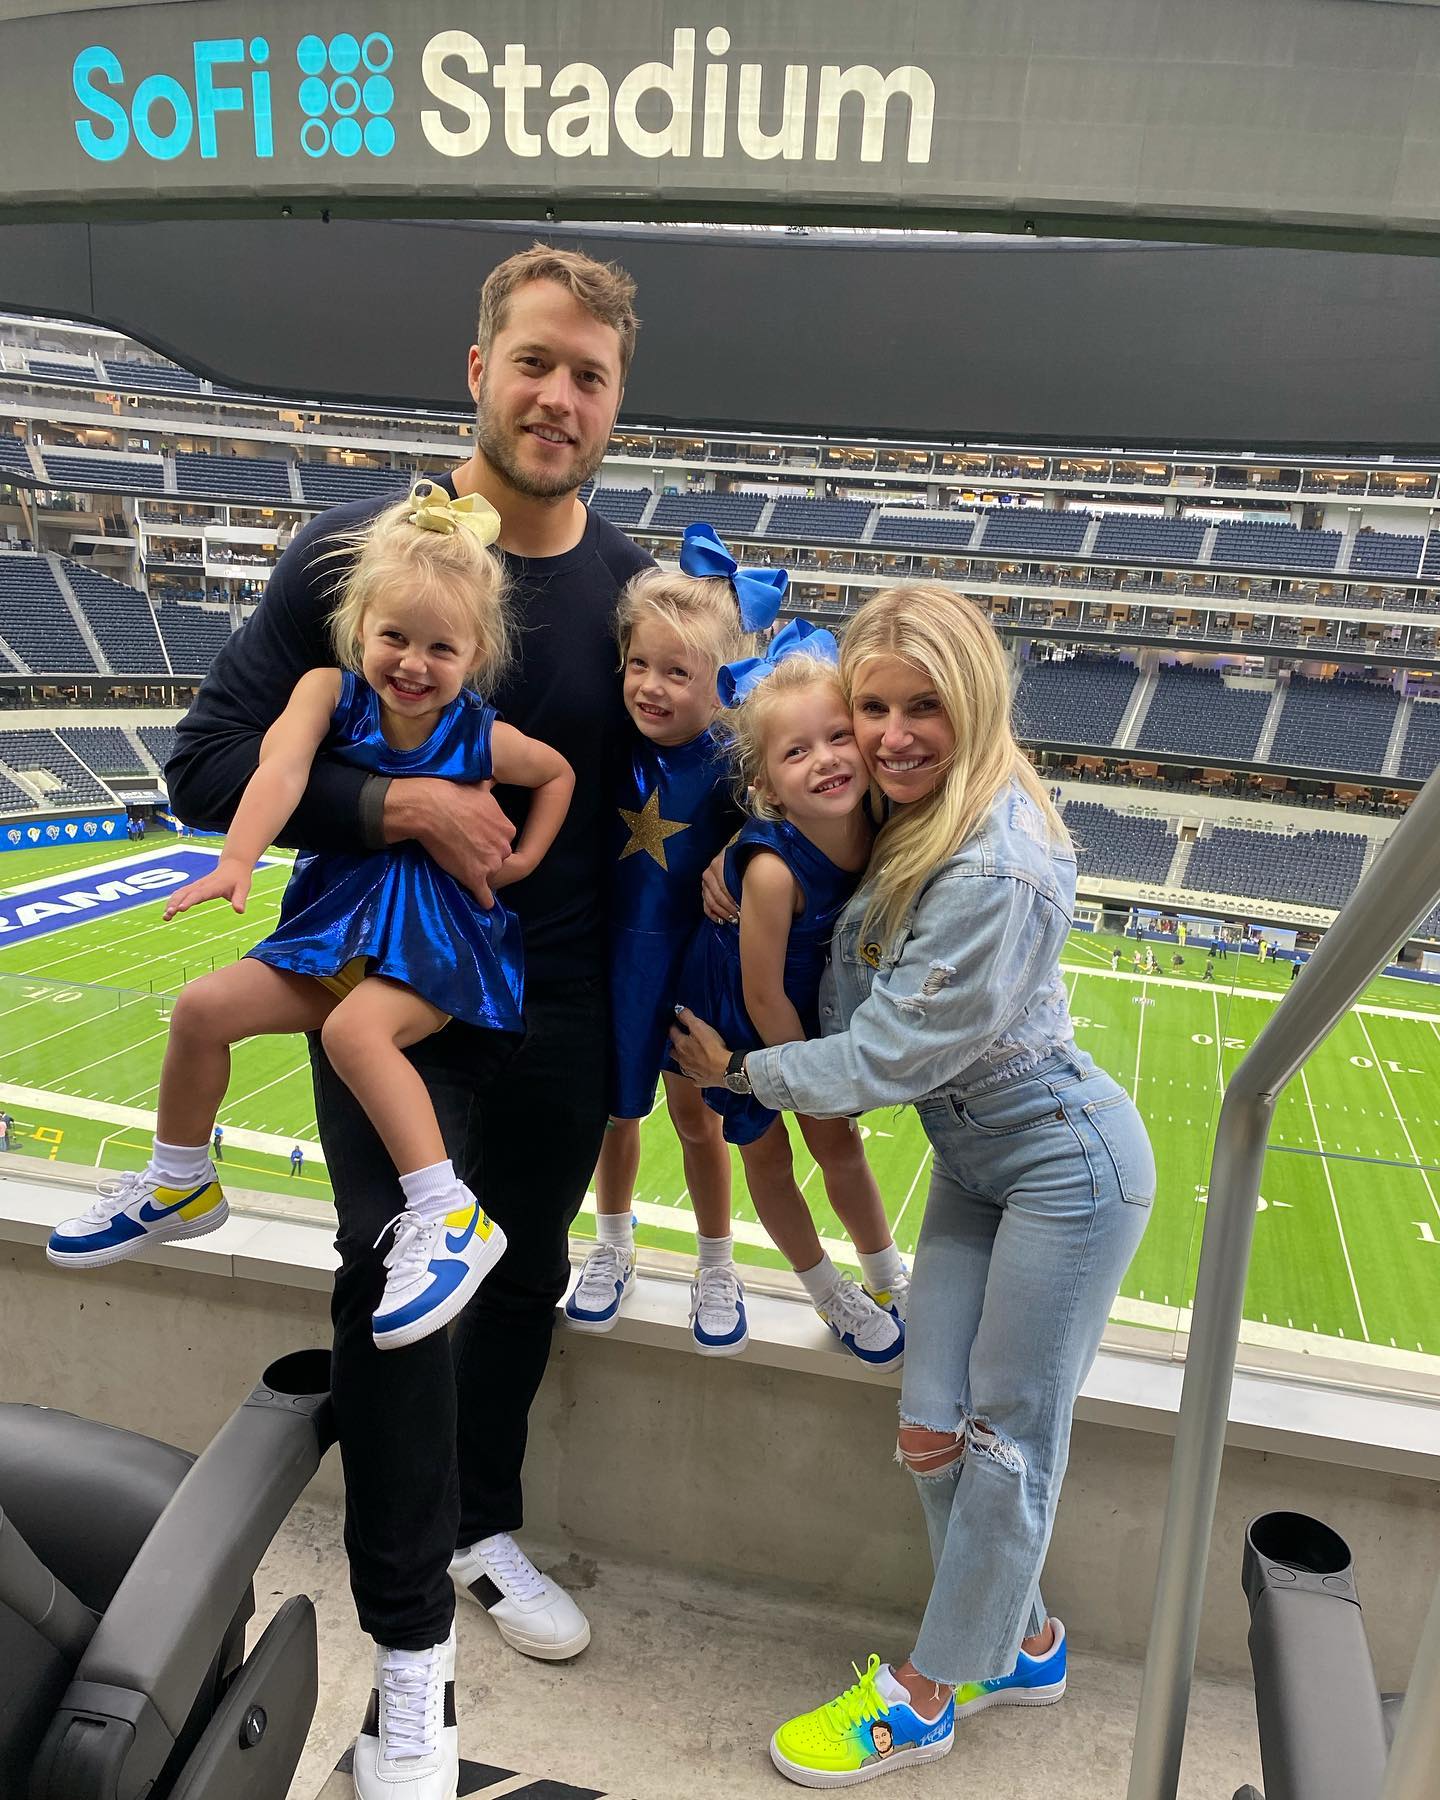 Kelly Stafford, wife of Rams quarterback, clears the air on health